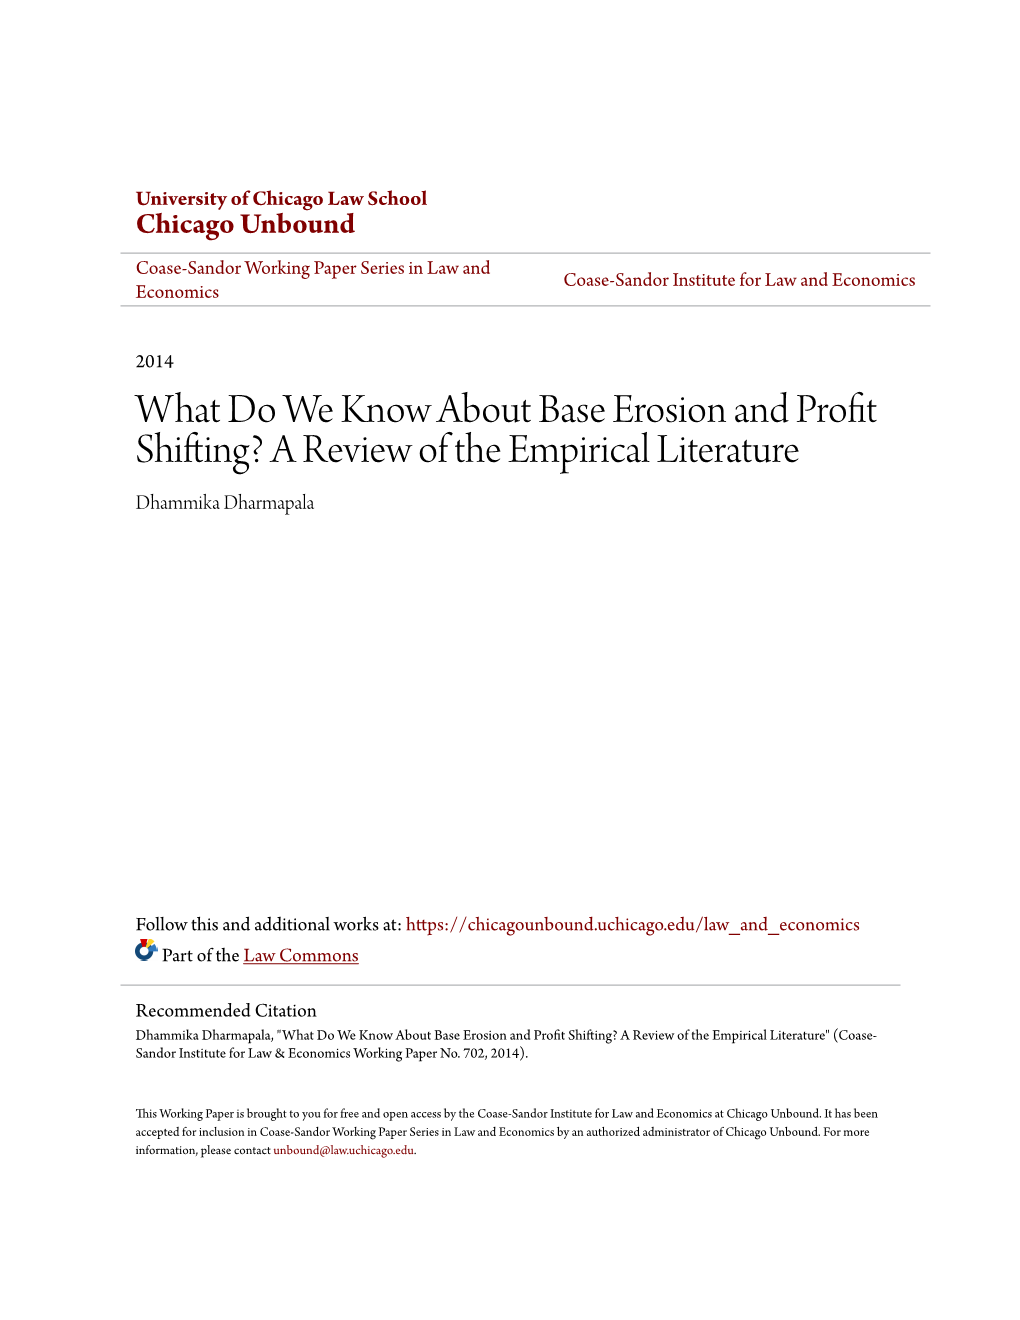 What Do We Know About Base Erosion and Profit Shifting? a Review of the Empirical Literature Dhammika Dharmapala